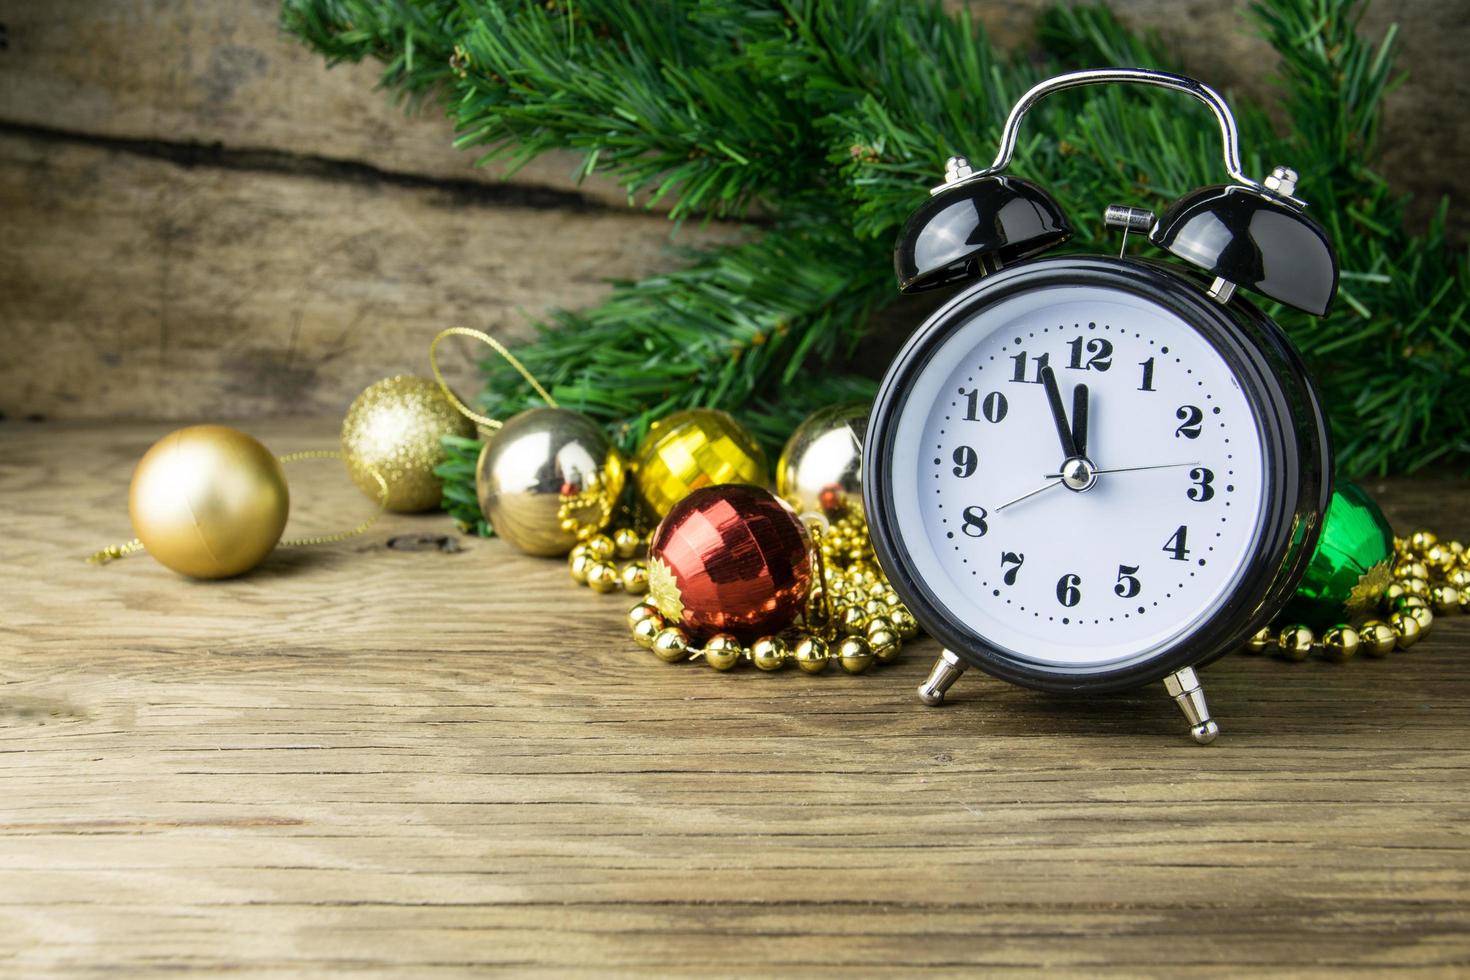 Alalrm-clock and Christmas baubles on wooden background photo